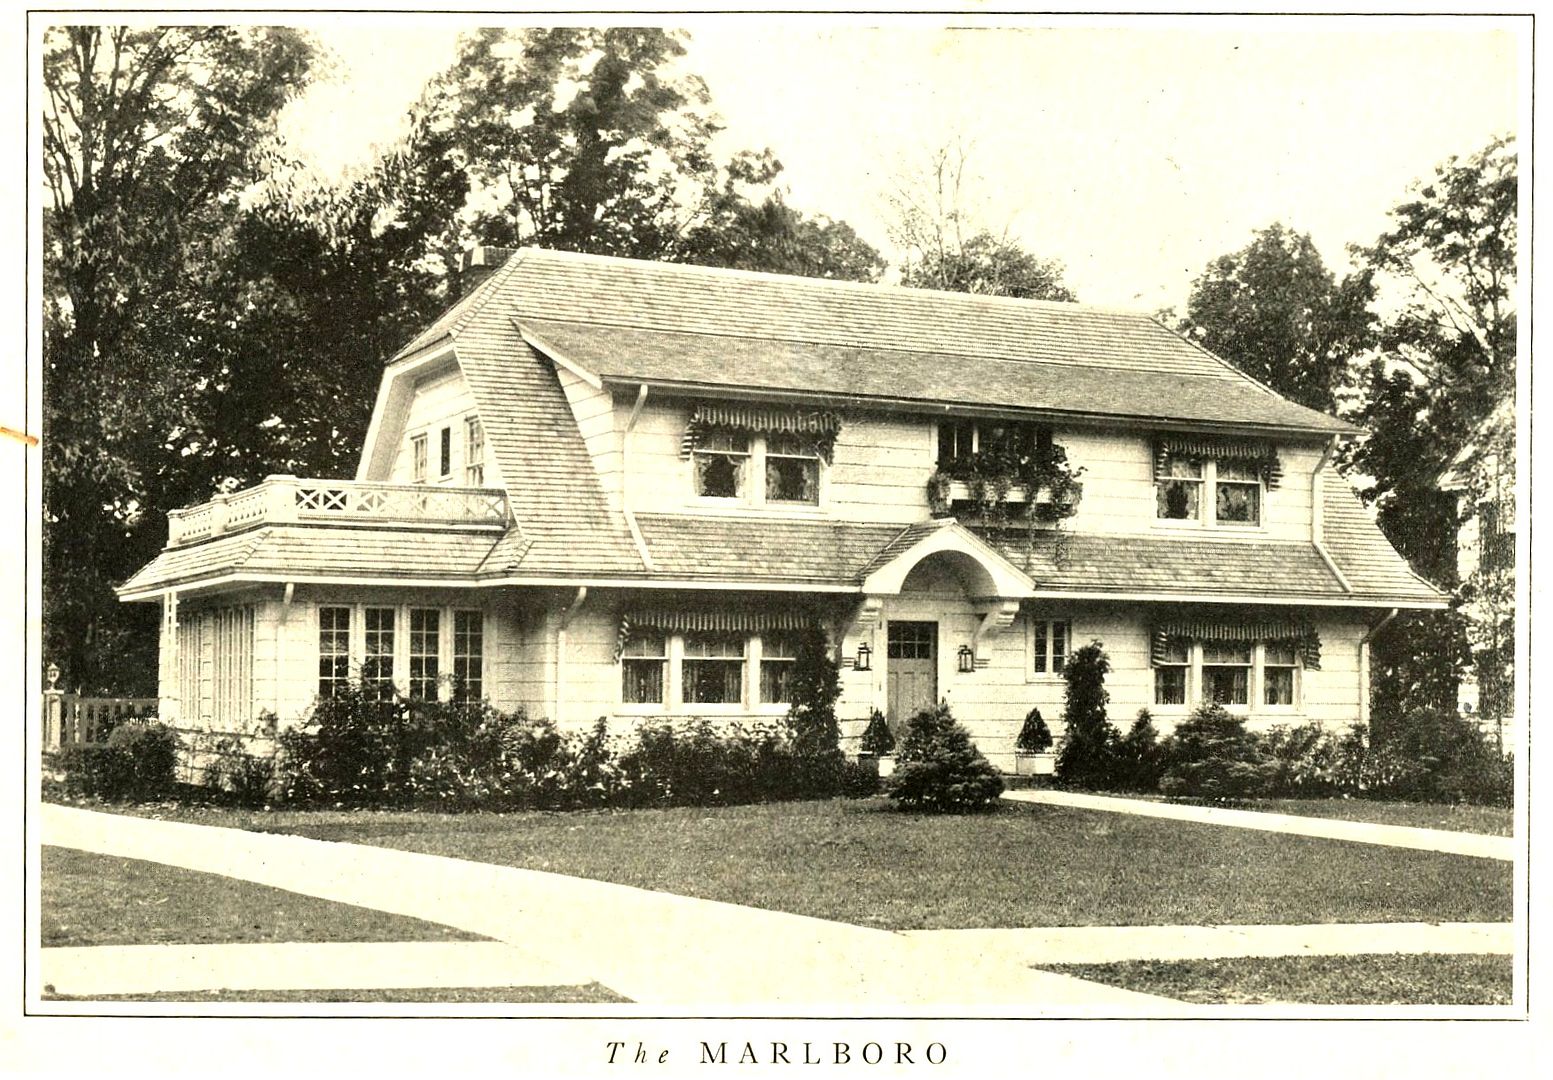 Last but not least is Lewis Manufacturing. They were based in Bay City, so its not surprising to find a kit home from Lewis there in Ann Arbor. The Marlboro was a very popular house for them, and for good reason. It was a real beauty, and a big house!